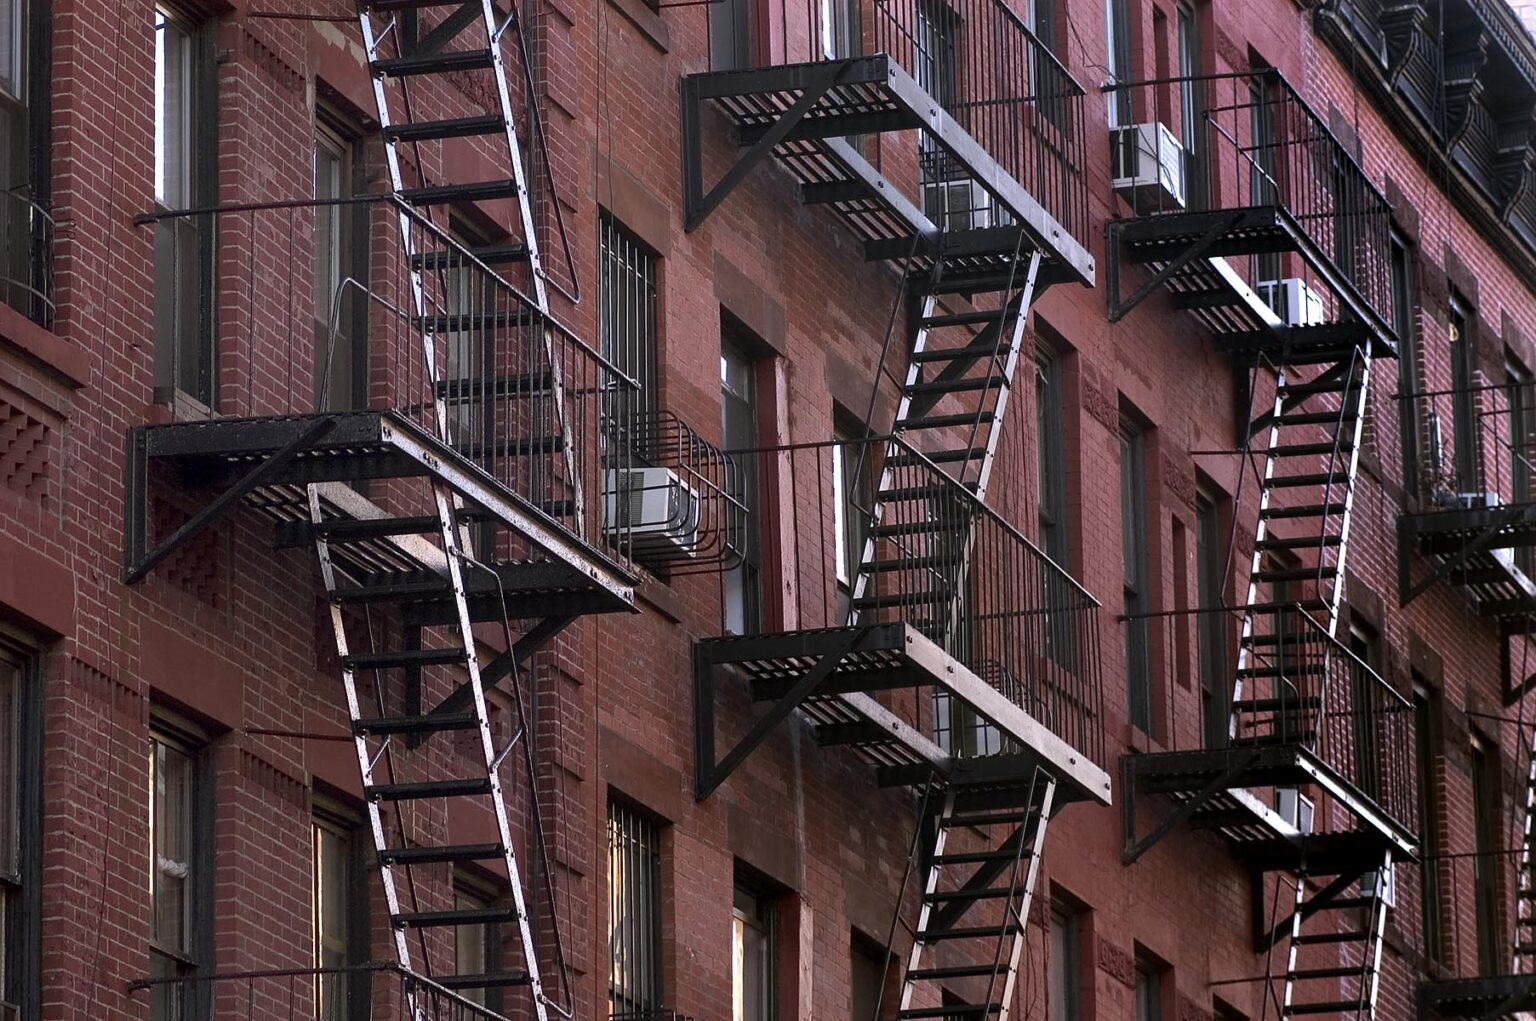 RED BRICK BUILDING and BLACK METAL FIRE FIRE ESCAPE STAIRS n MANHATTAN - NEW YORK CITY, NEW YORK, USA